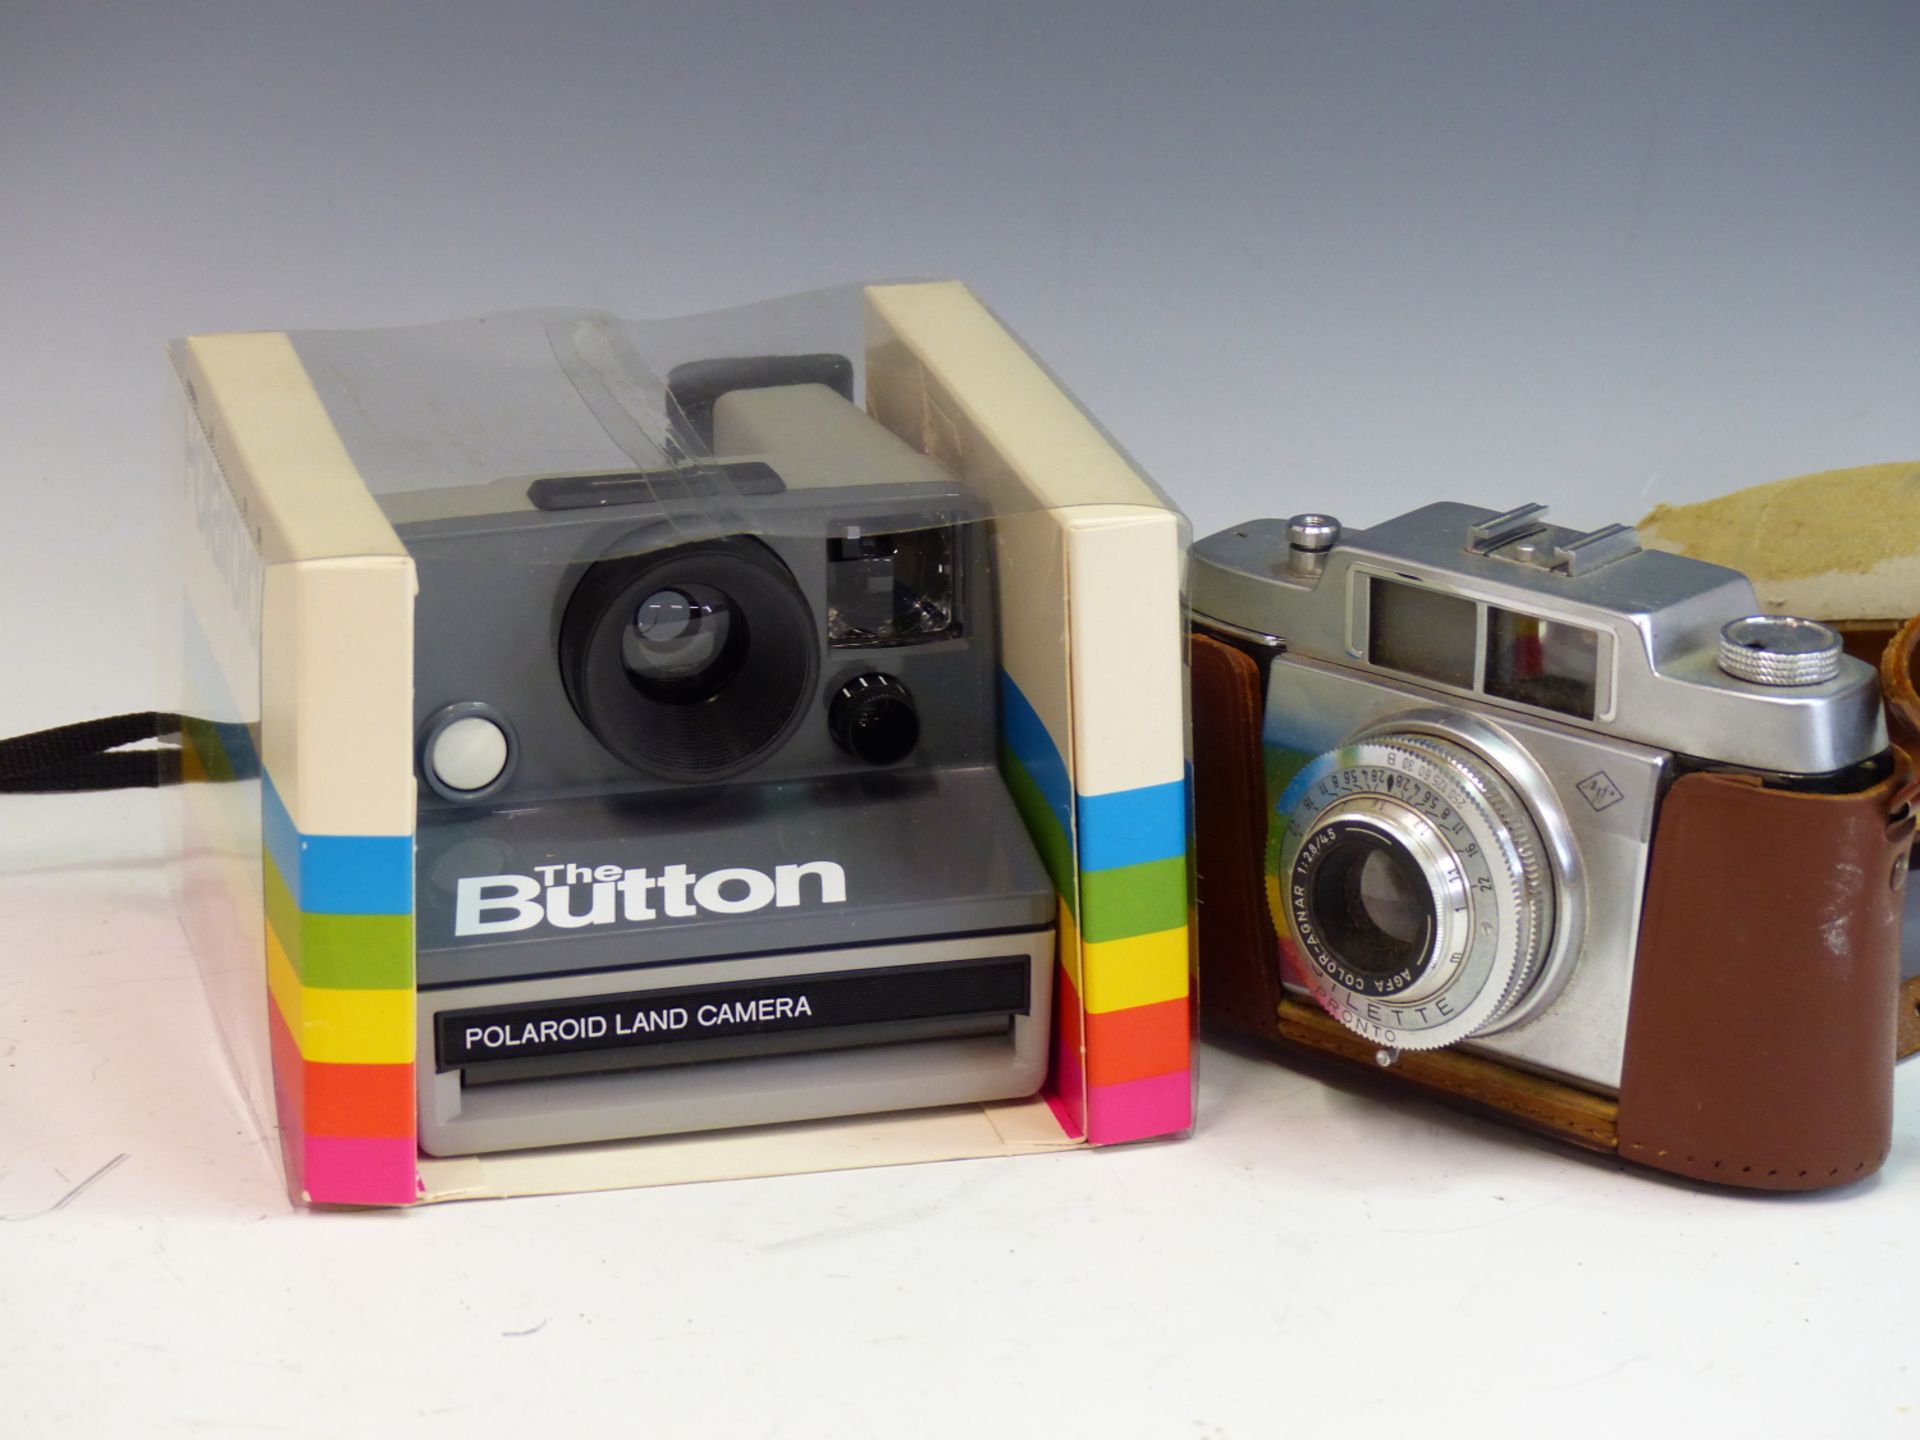 A POLAROID LAND CAMERA "THE BUTTON" IN ORIGINAL PACKAGING WITH MANUAL. TOGETHER WITH AN AGFA SILETTE